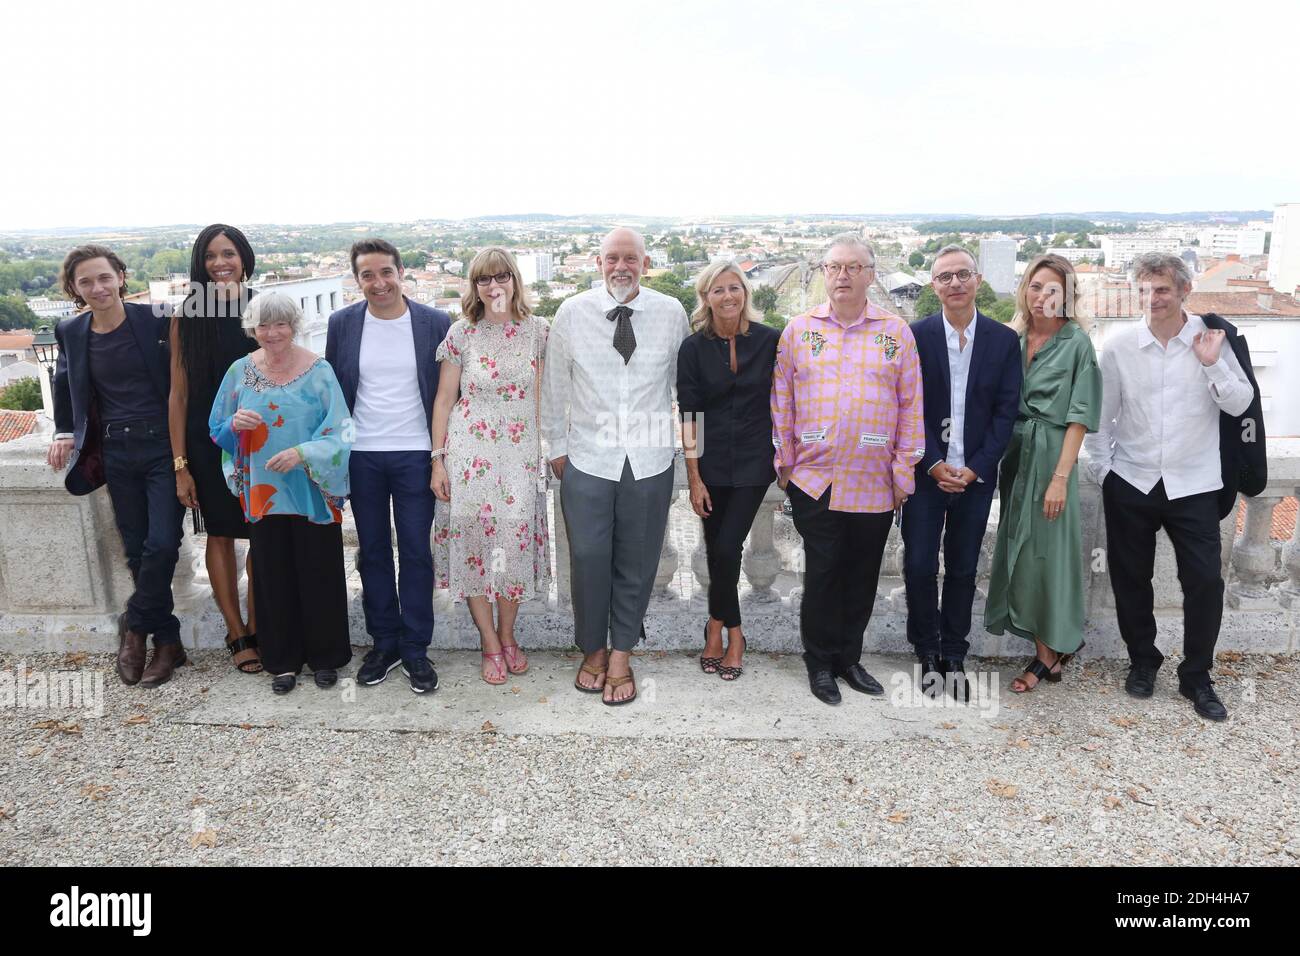 Singer Raphael, actress Stefi Celma, Marie-France Briere, editorial manager at 'Canal Plus Cinema' Ivan Guyot, producer Denise Robert, President of the Jury John Malkovich, journalist Claire Chazal, Dominique Besnehard, writer Philippe Besson, actress Laura Smet and director Lucas Belvaux pose for the Jury photocall as part of the 10th Angouleme Film Festival in Angouleme, France on August 22, 2017. Photo by Jerome Domine/ABACAPRESS.COM Stock Photo